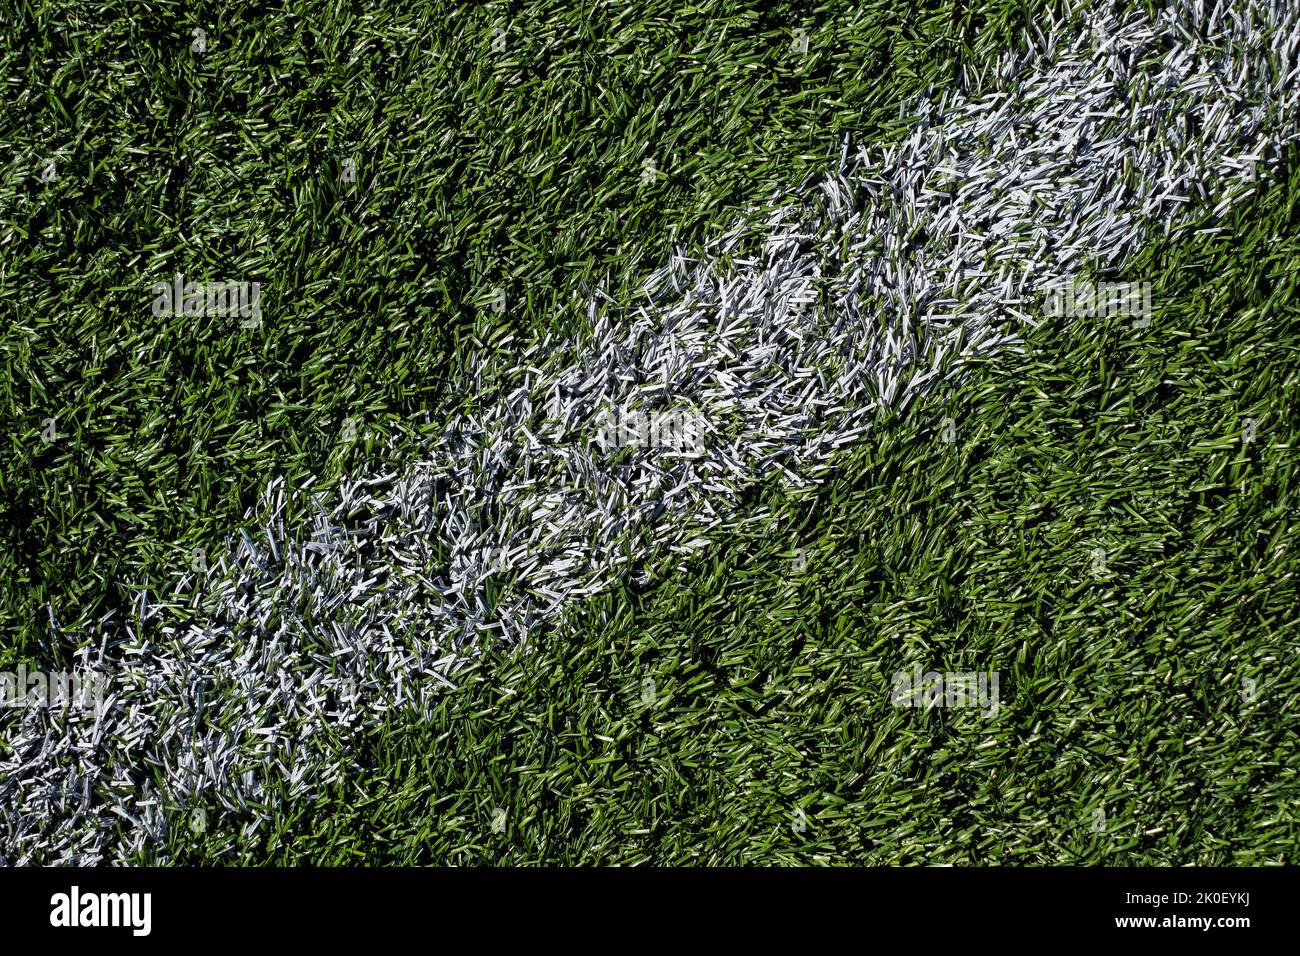 Green football grass background with white line. Soccer stadium field. Stock Photo